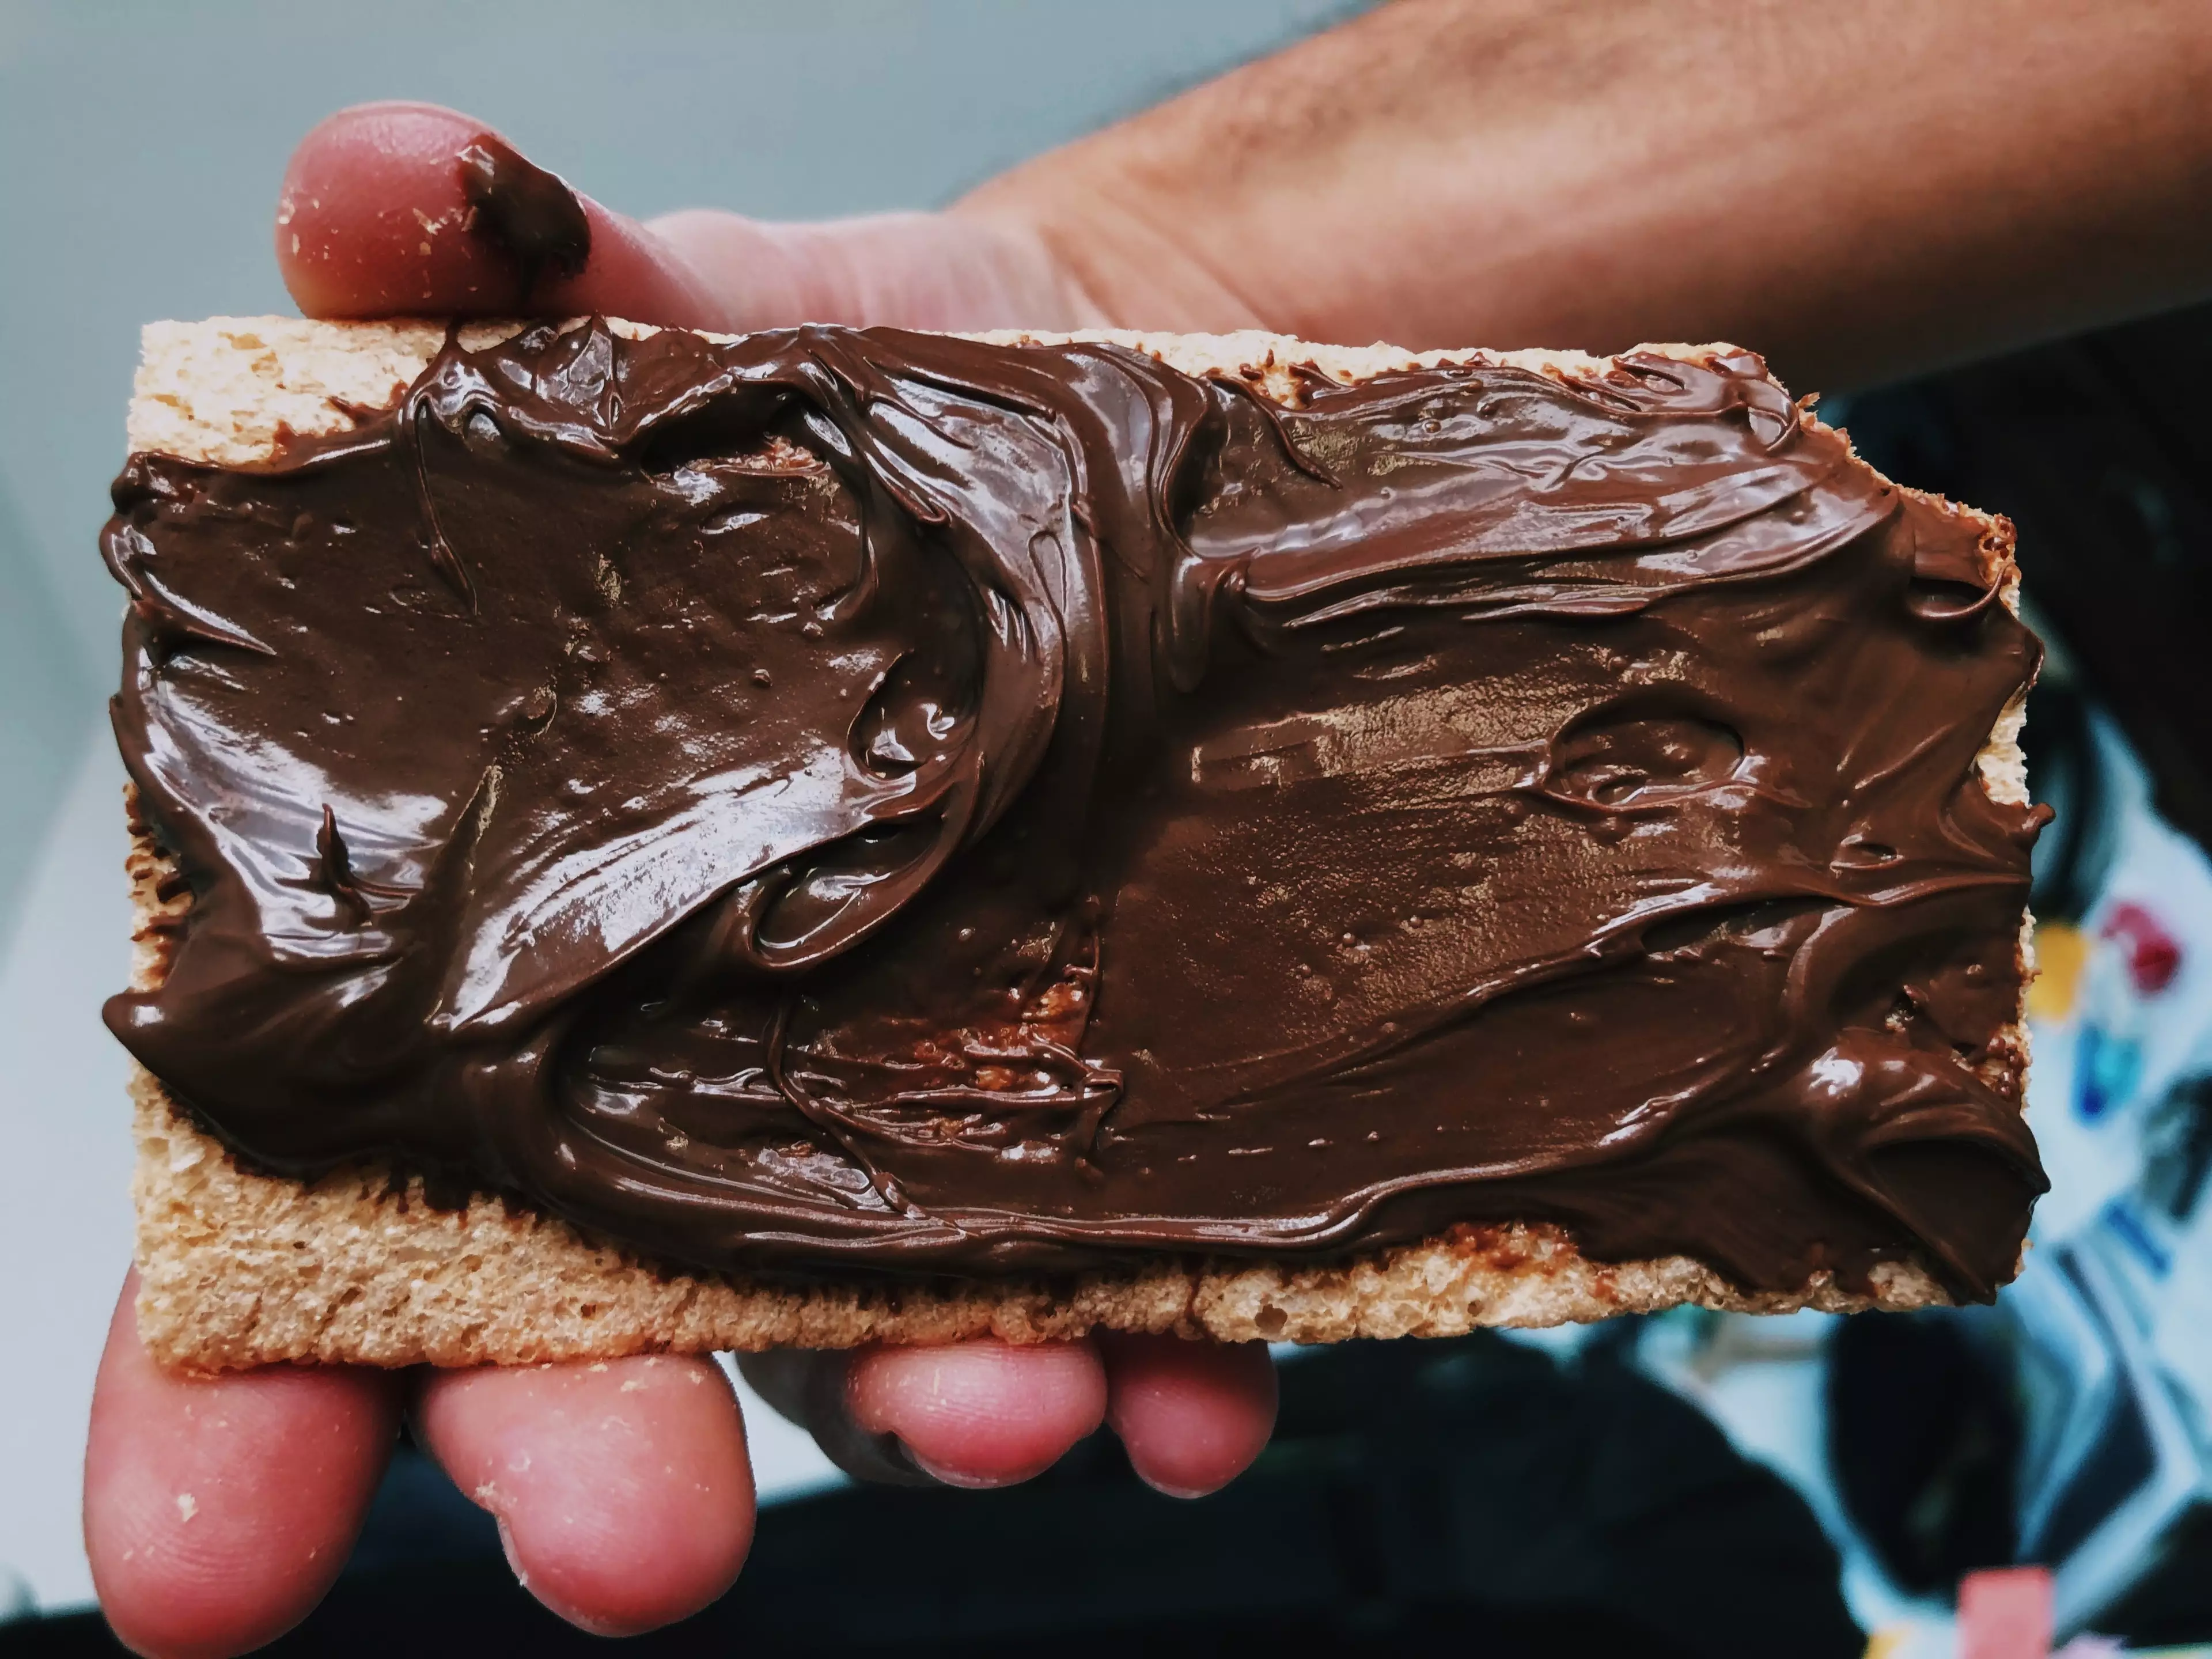 We could slather Nutella on everything (